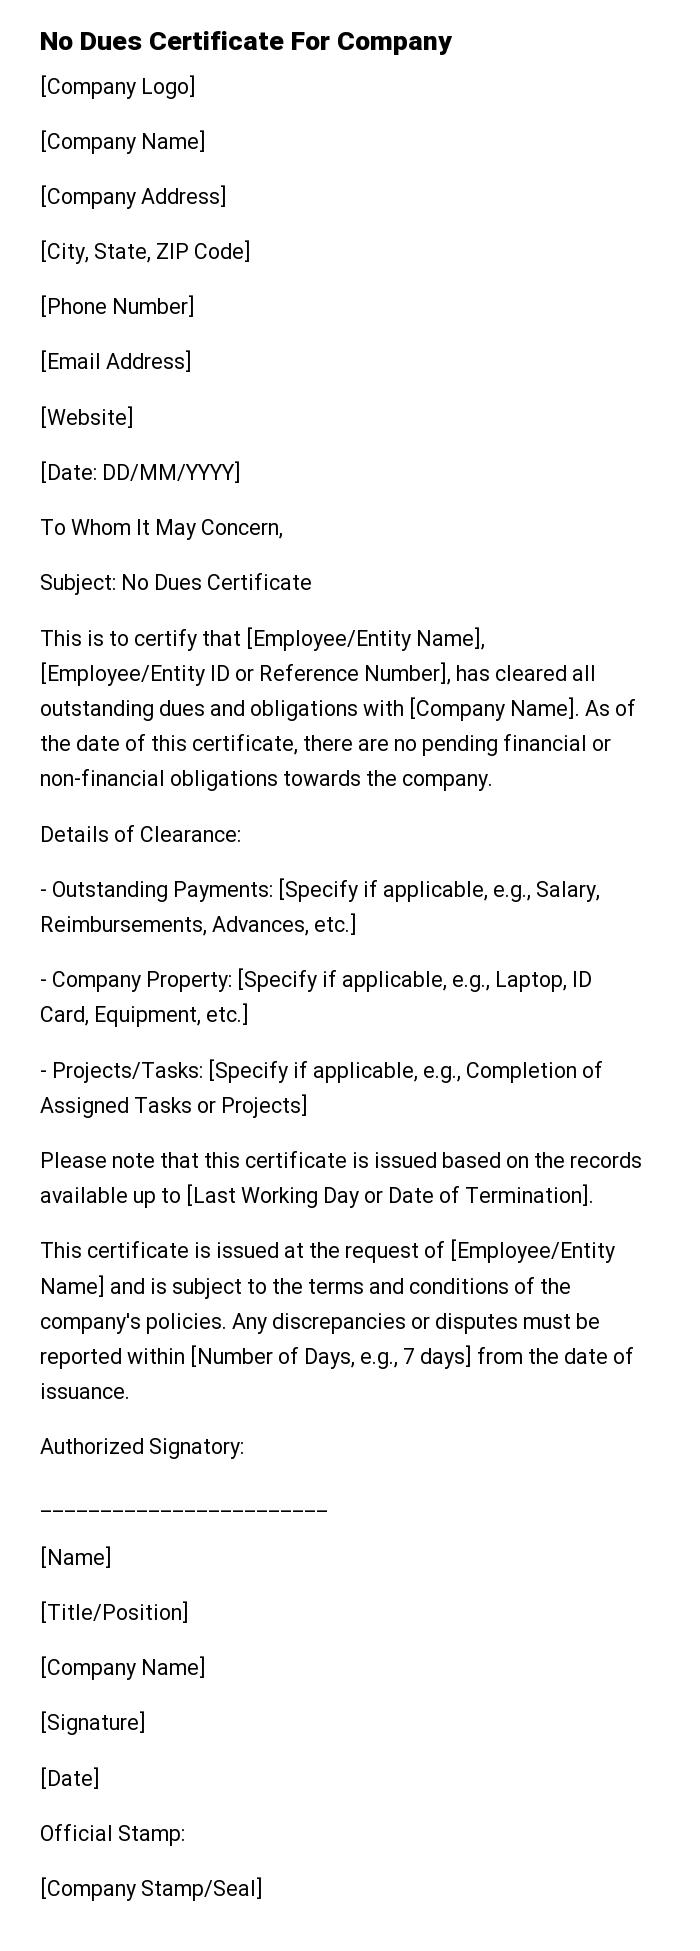 No Dues Certificate For Company